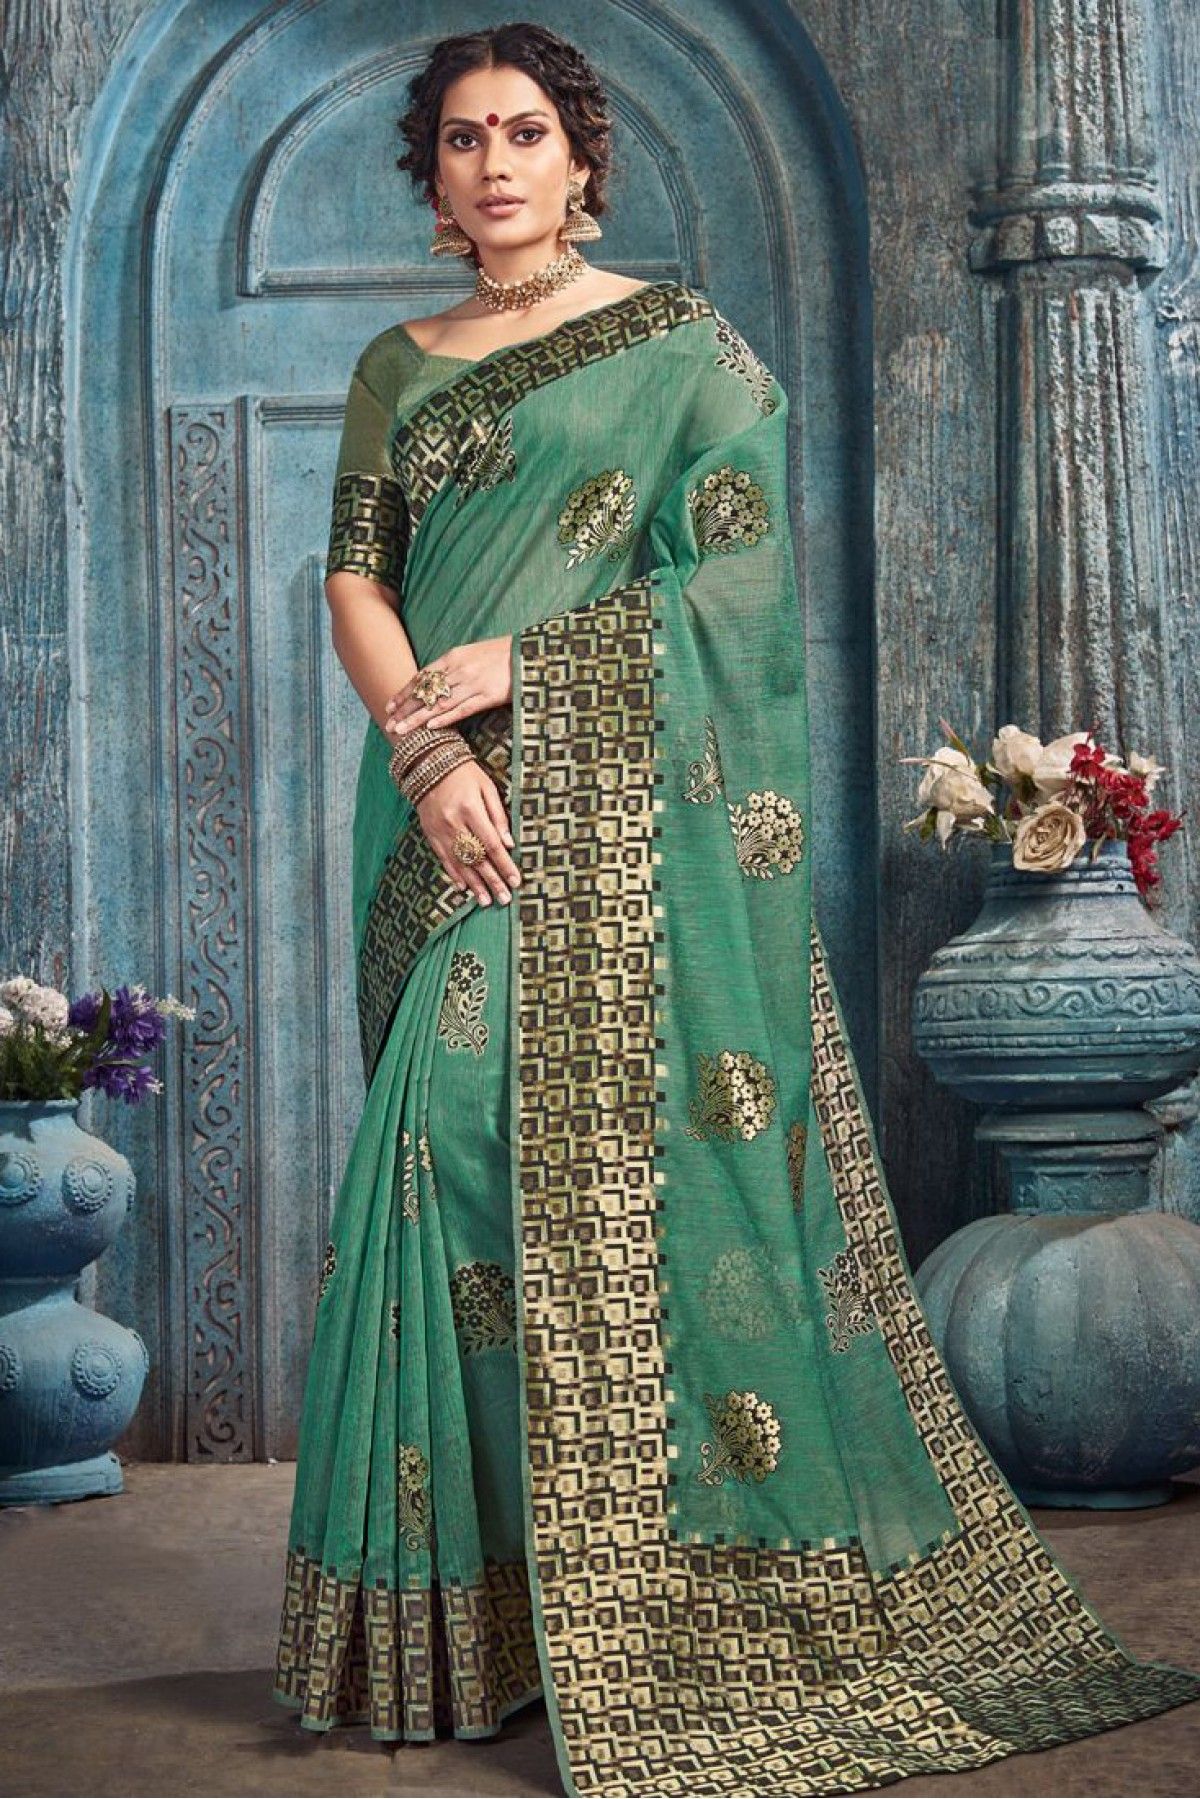 Ranas Golden Yellow Faux Silk Sarees at Rs 2985 | Party Wear Saree in  Jaipur | ID: 9818682773